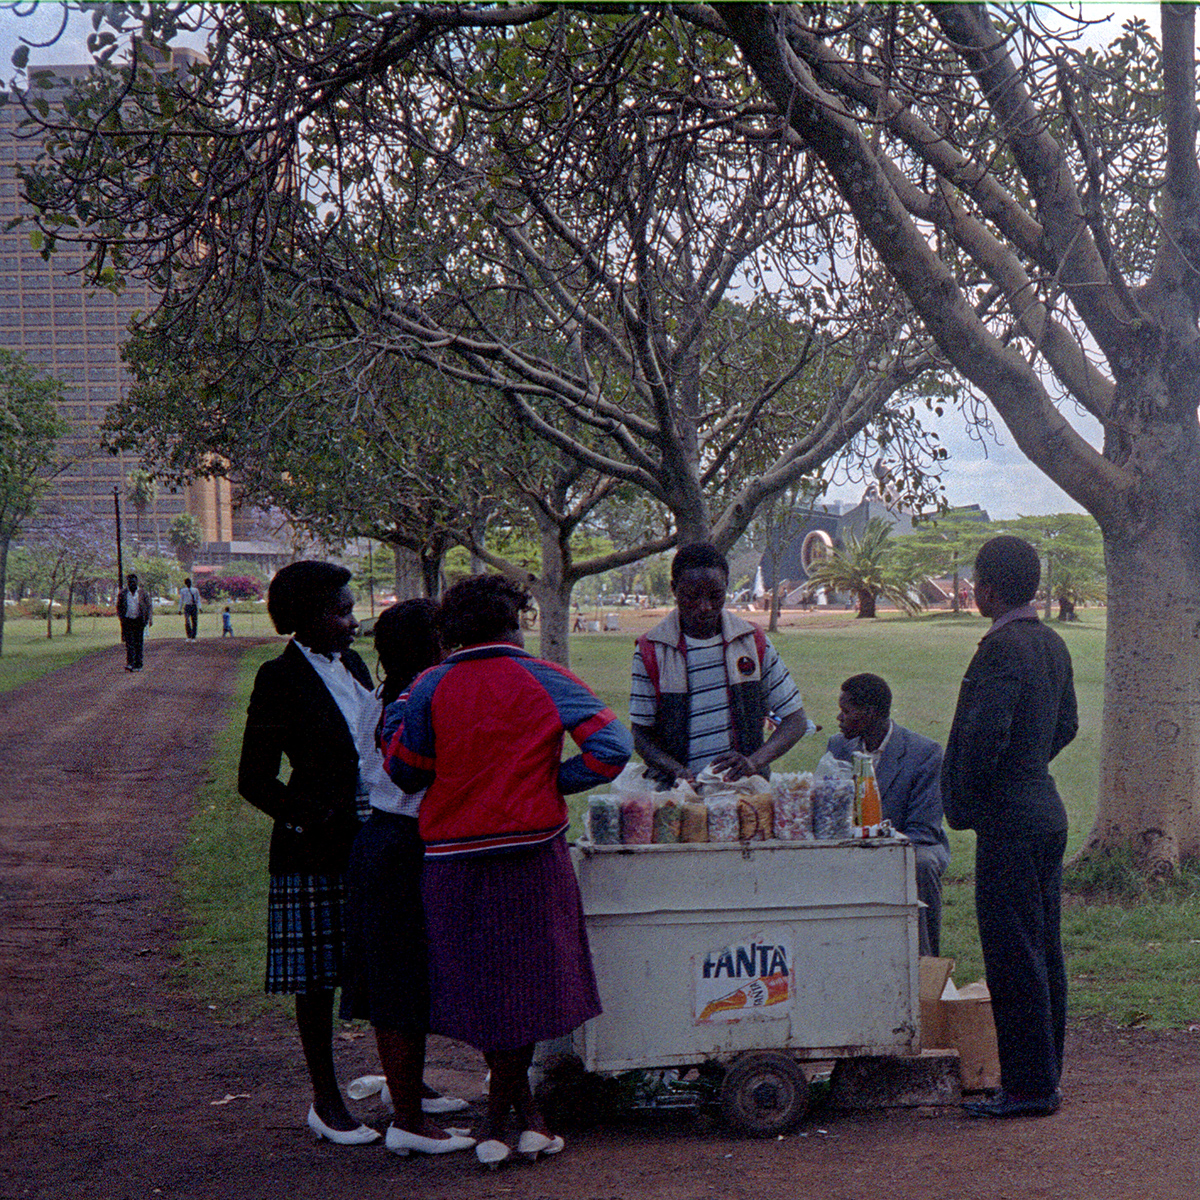 A pushcart operator with Fanta drinks